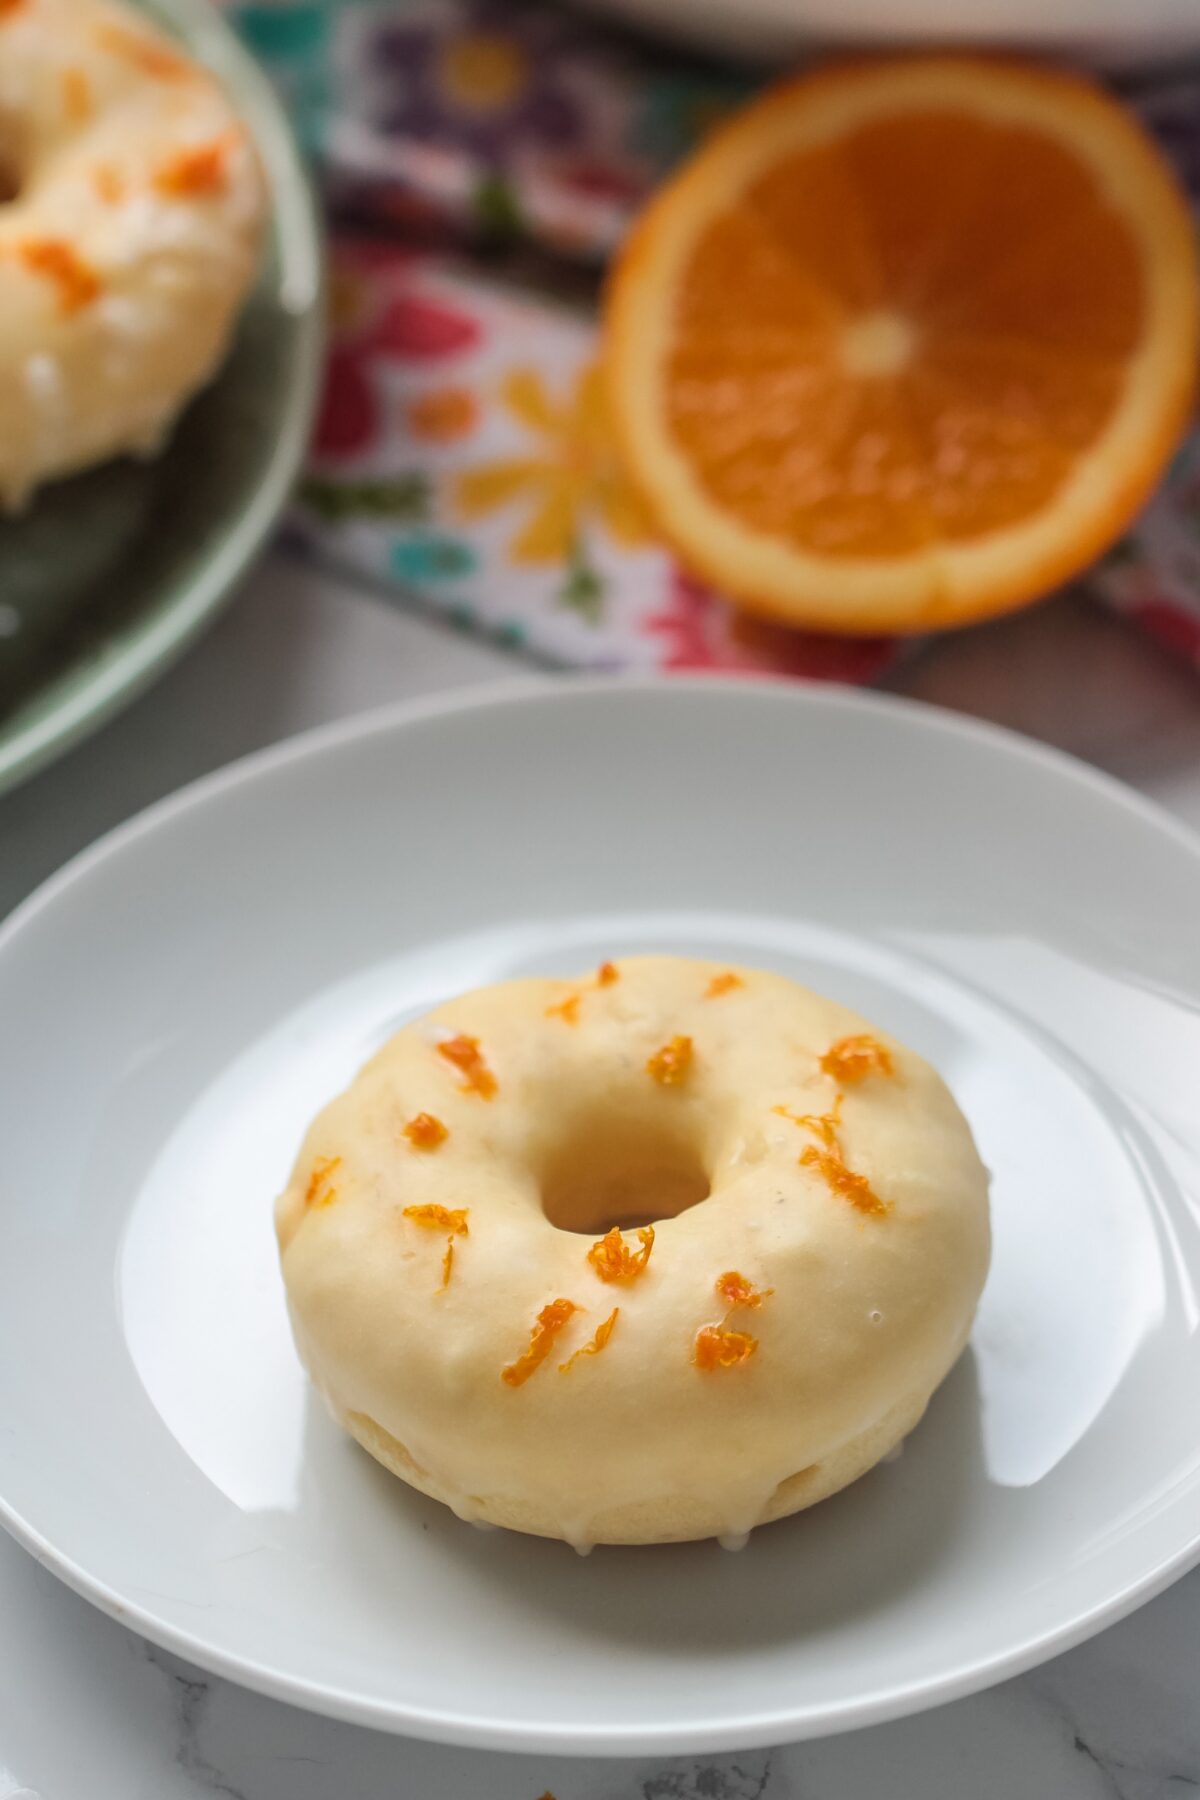 Love homemade donuts? Check out this delicious and easy to follow recipe for orange glazed cake donuts! They can be baked or fried!